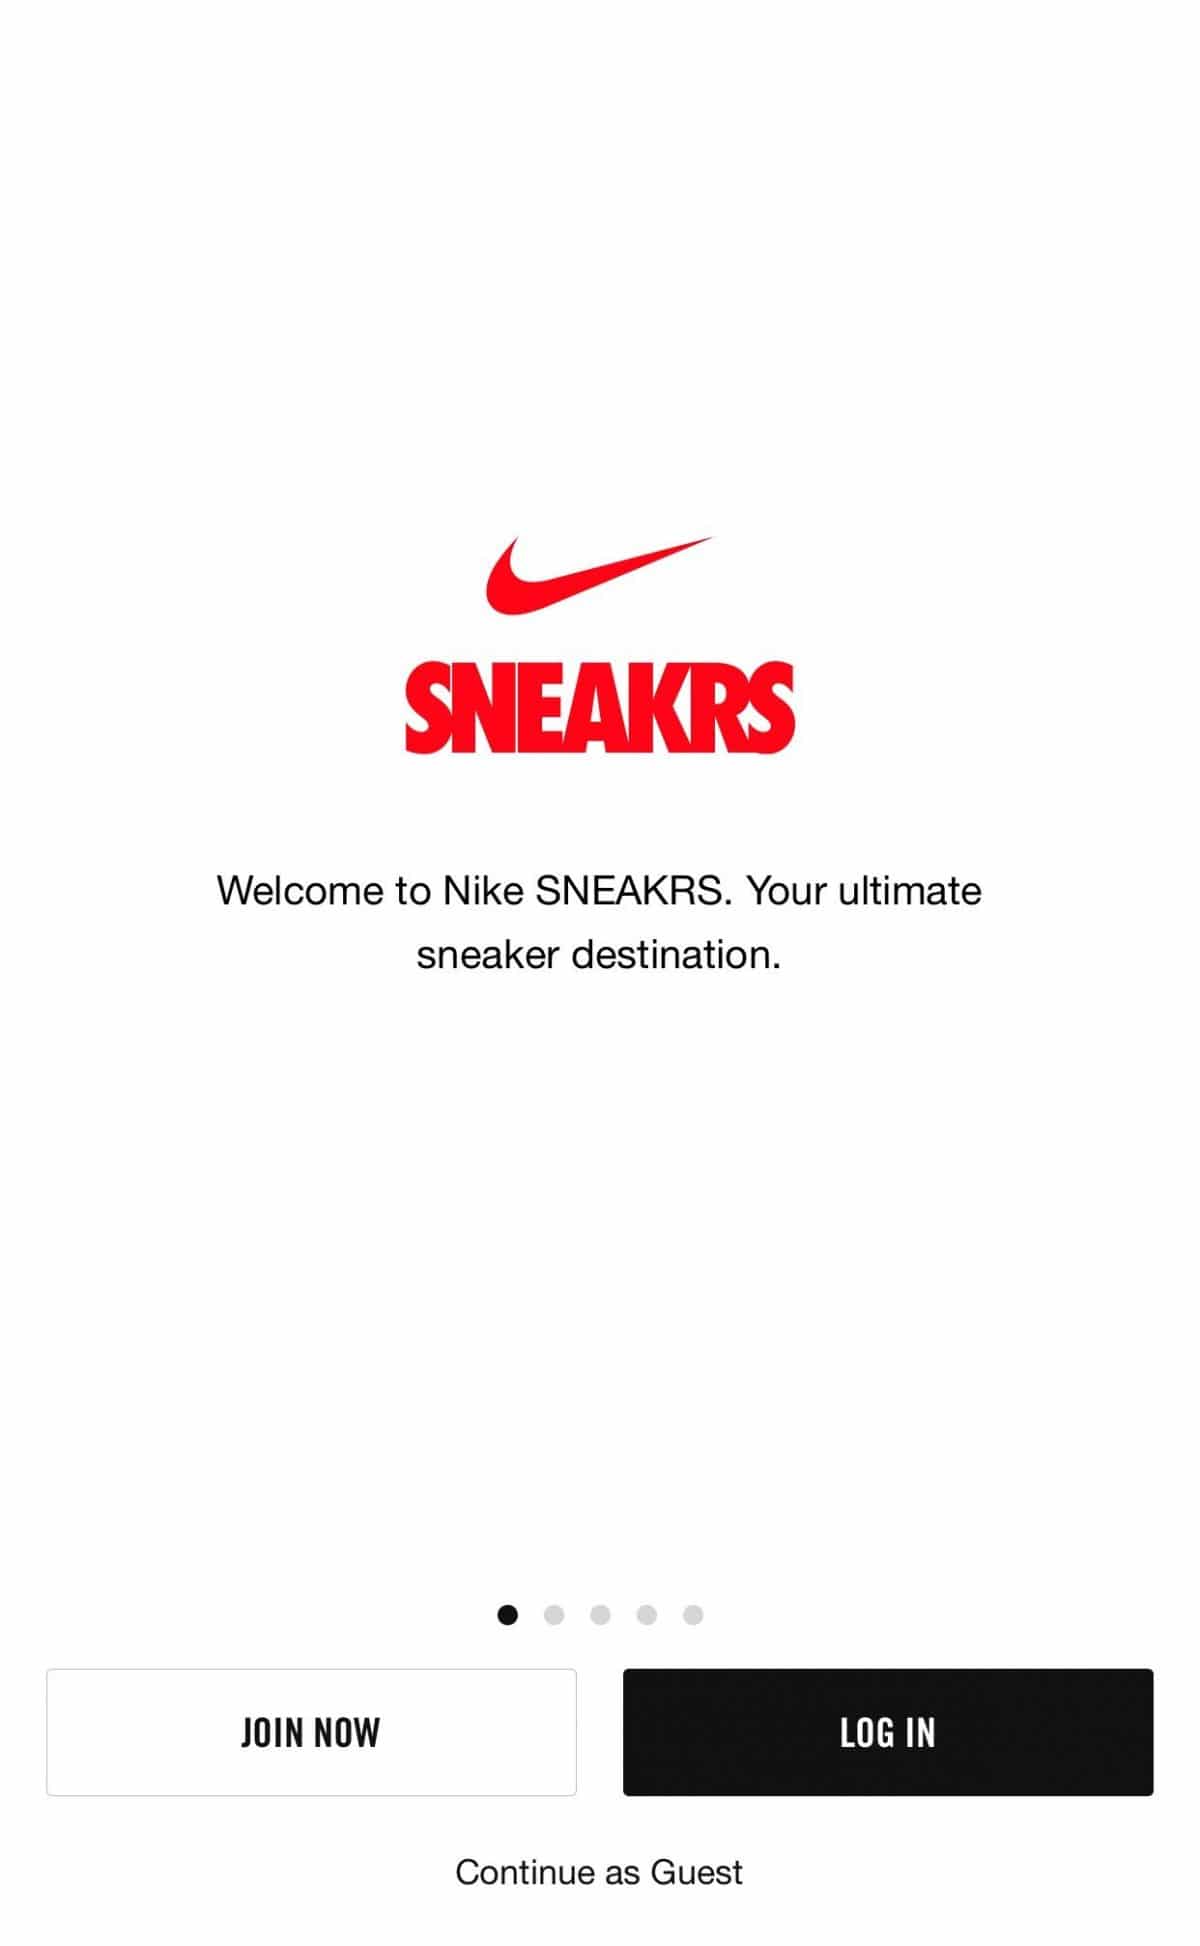 Hands On with Nike's Sneakrs app 